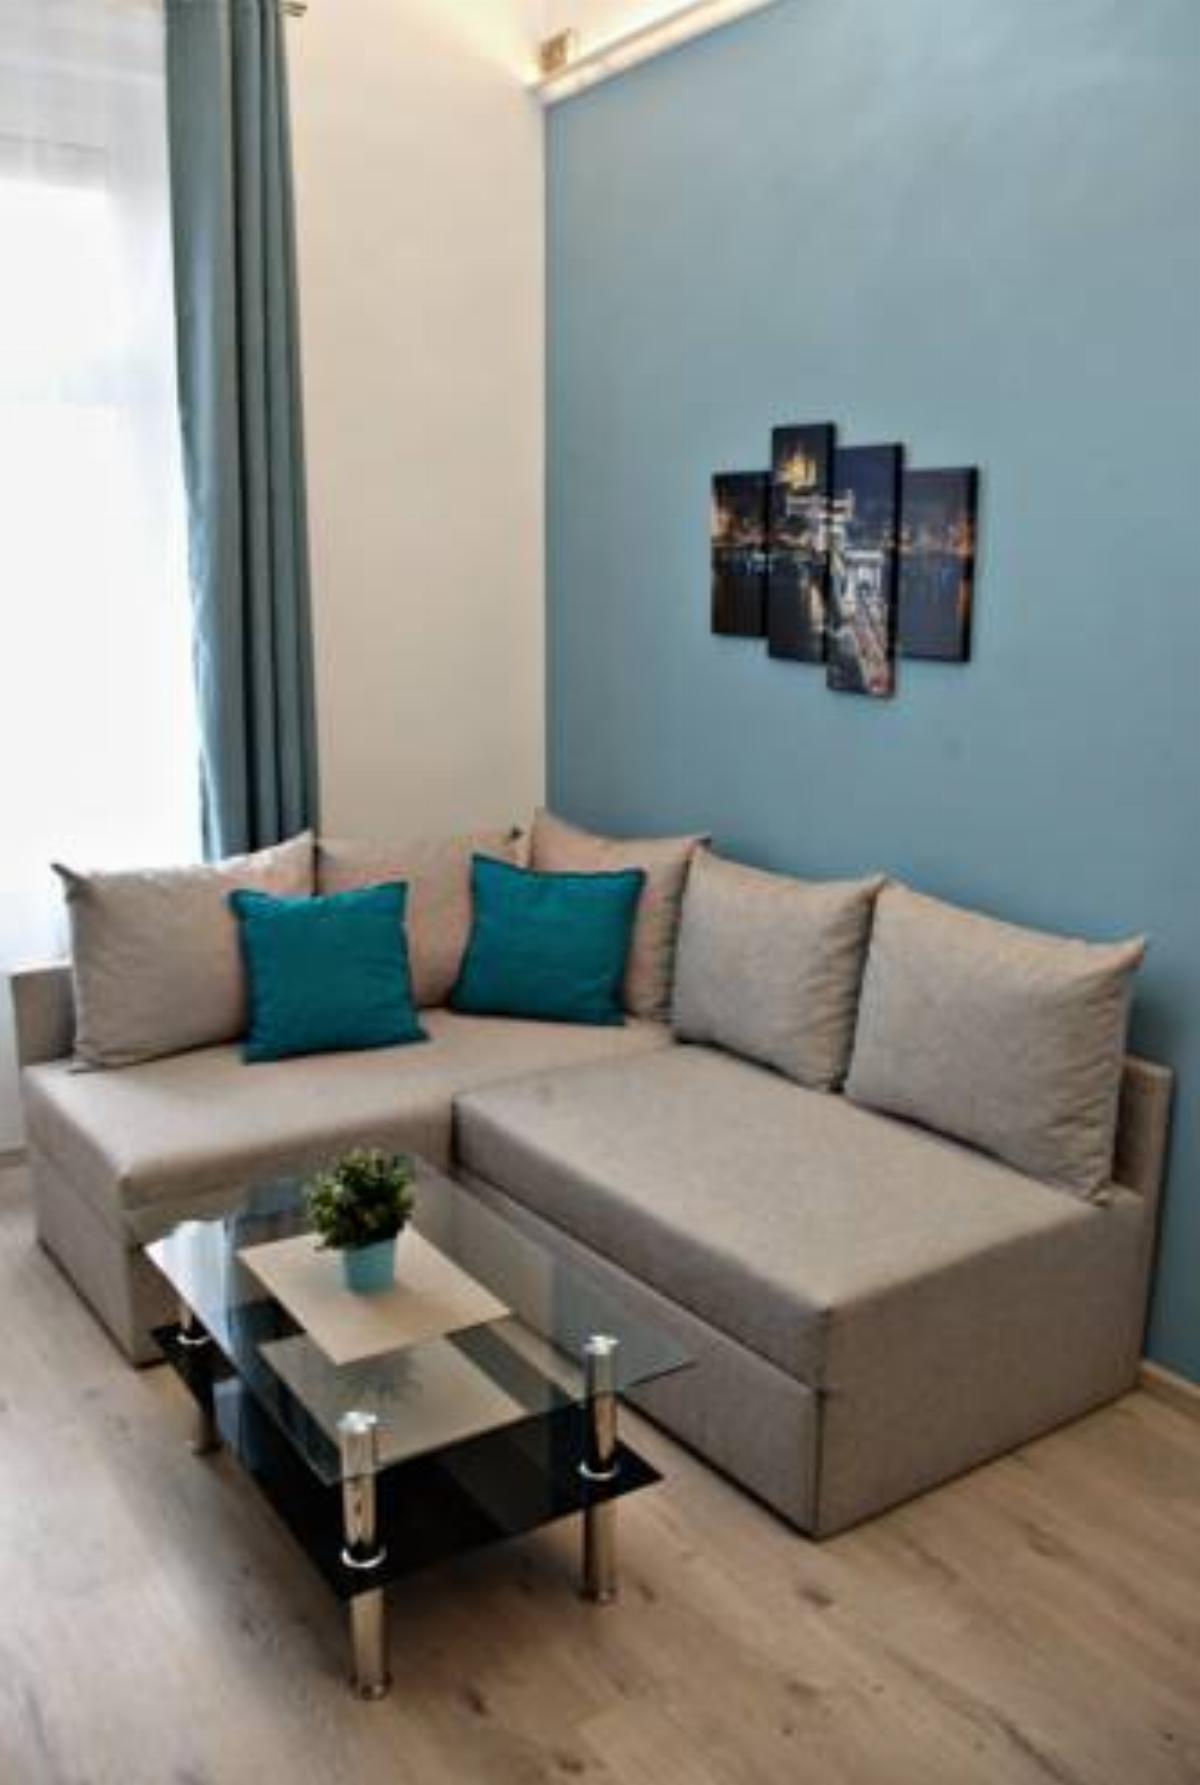 New-renovated 3BR flat, 2,5 bathrooms at city park Hotel Budapest Hungary